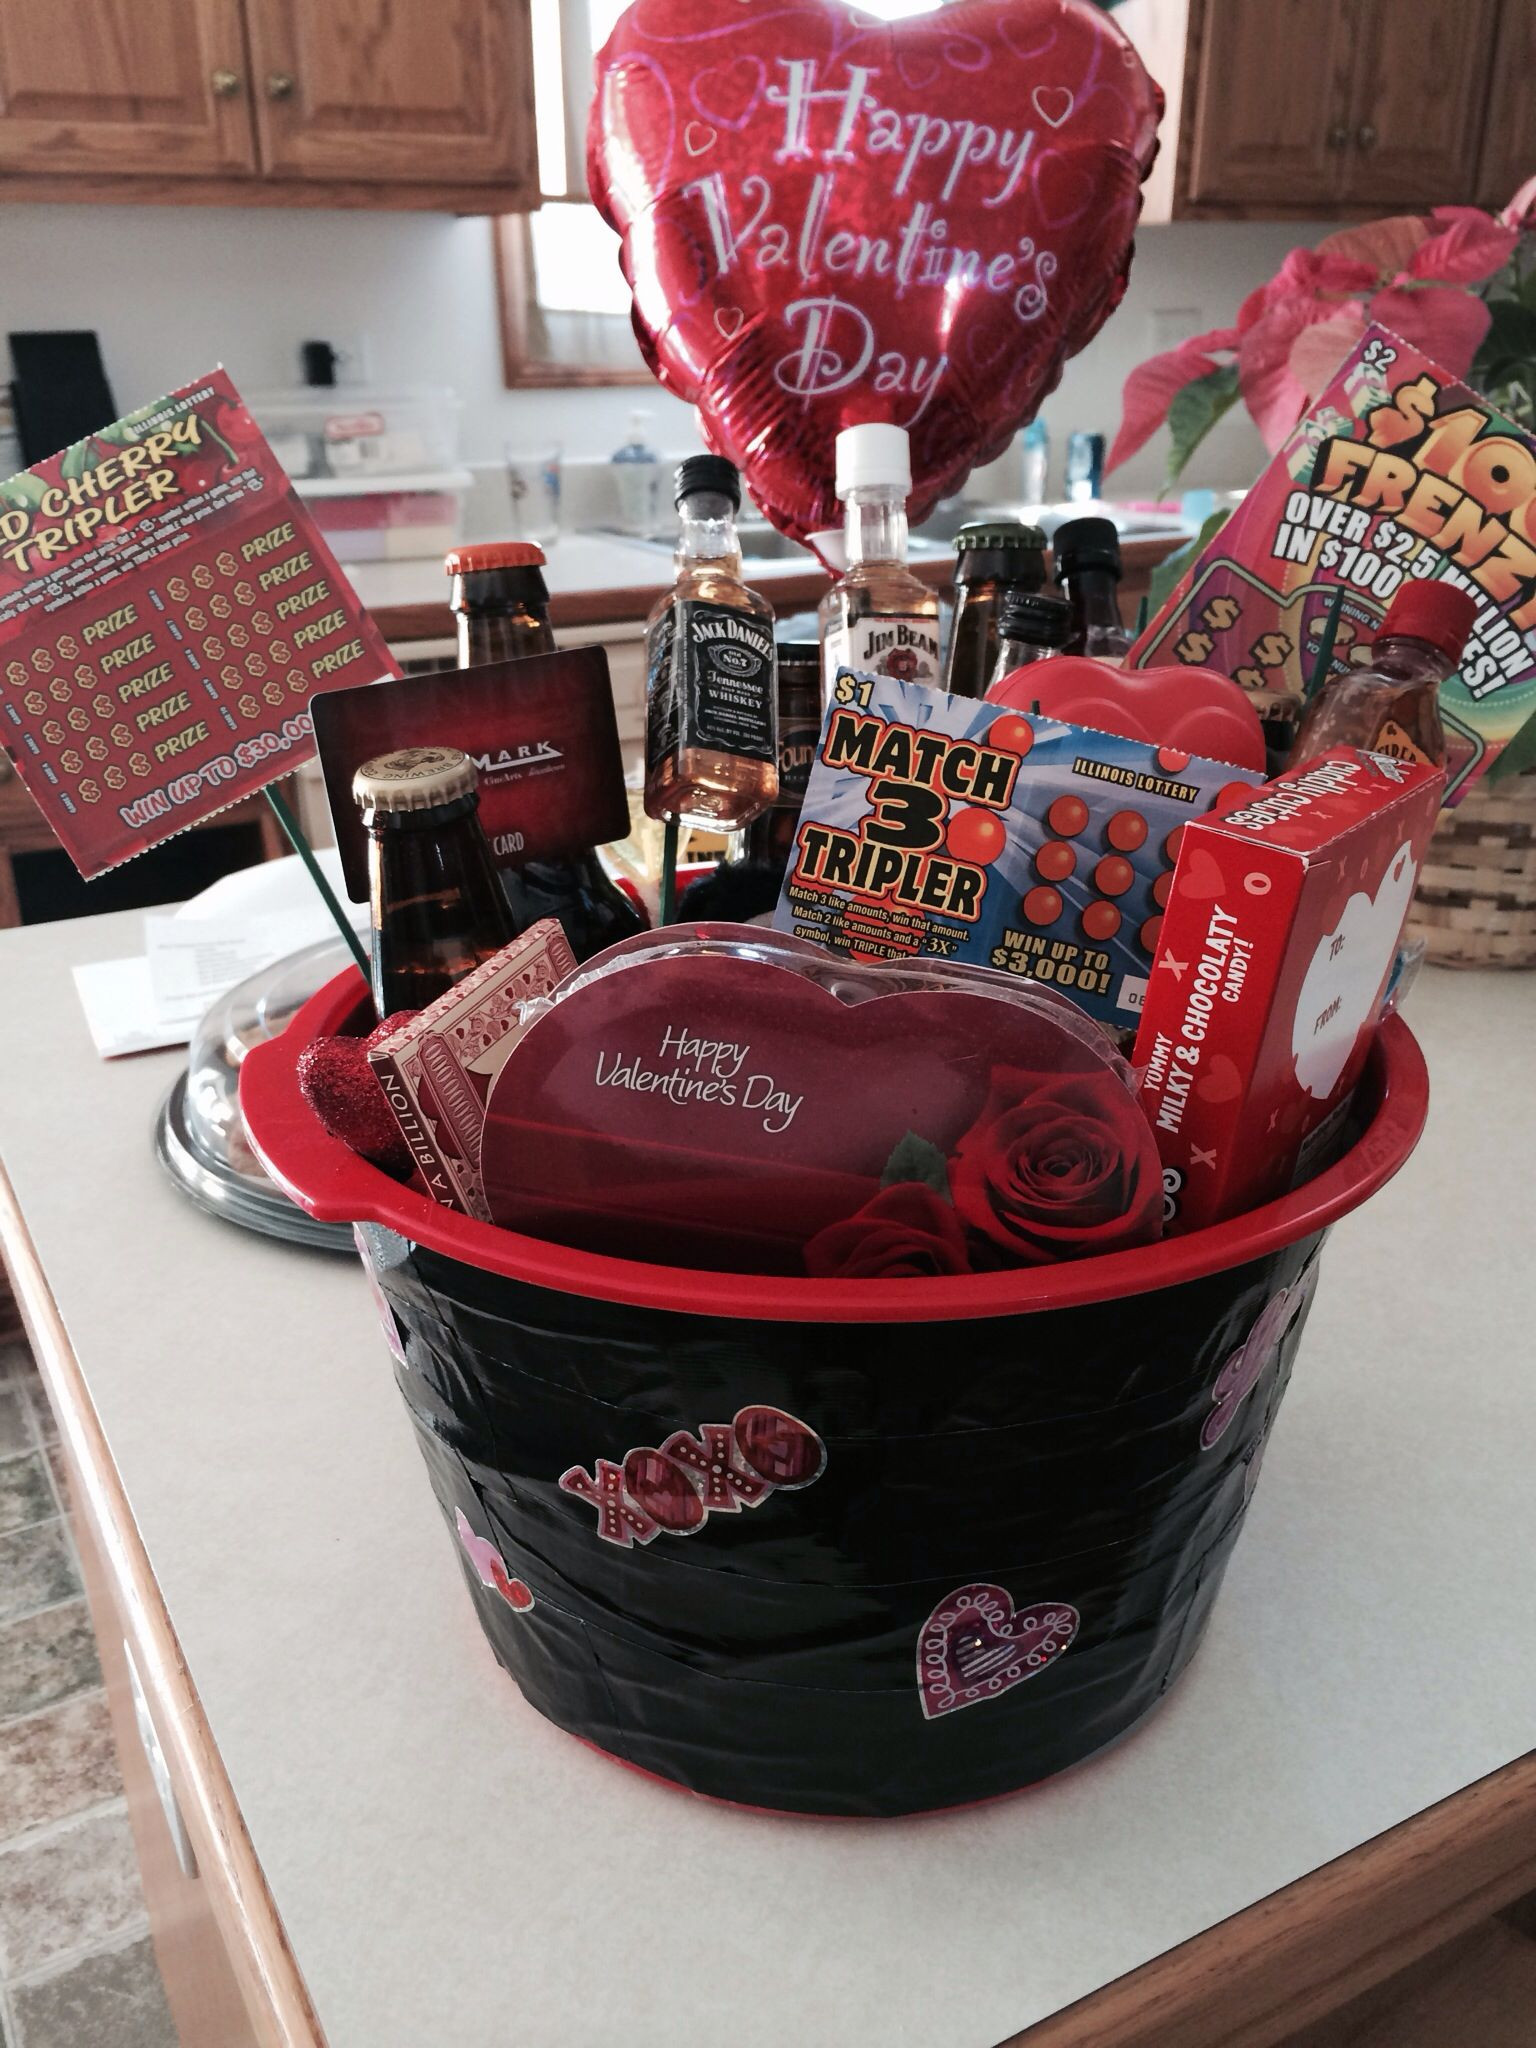 Valentines For Him Gift Ideas
 Valentines day basket for him I used 6 IPA beers